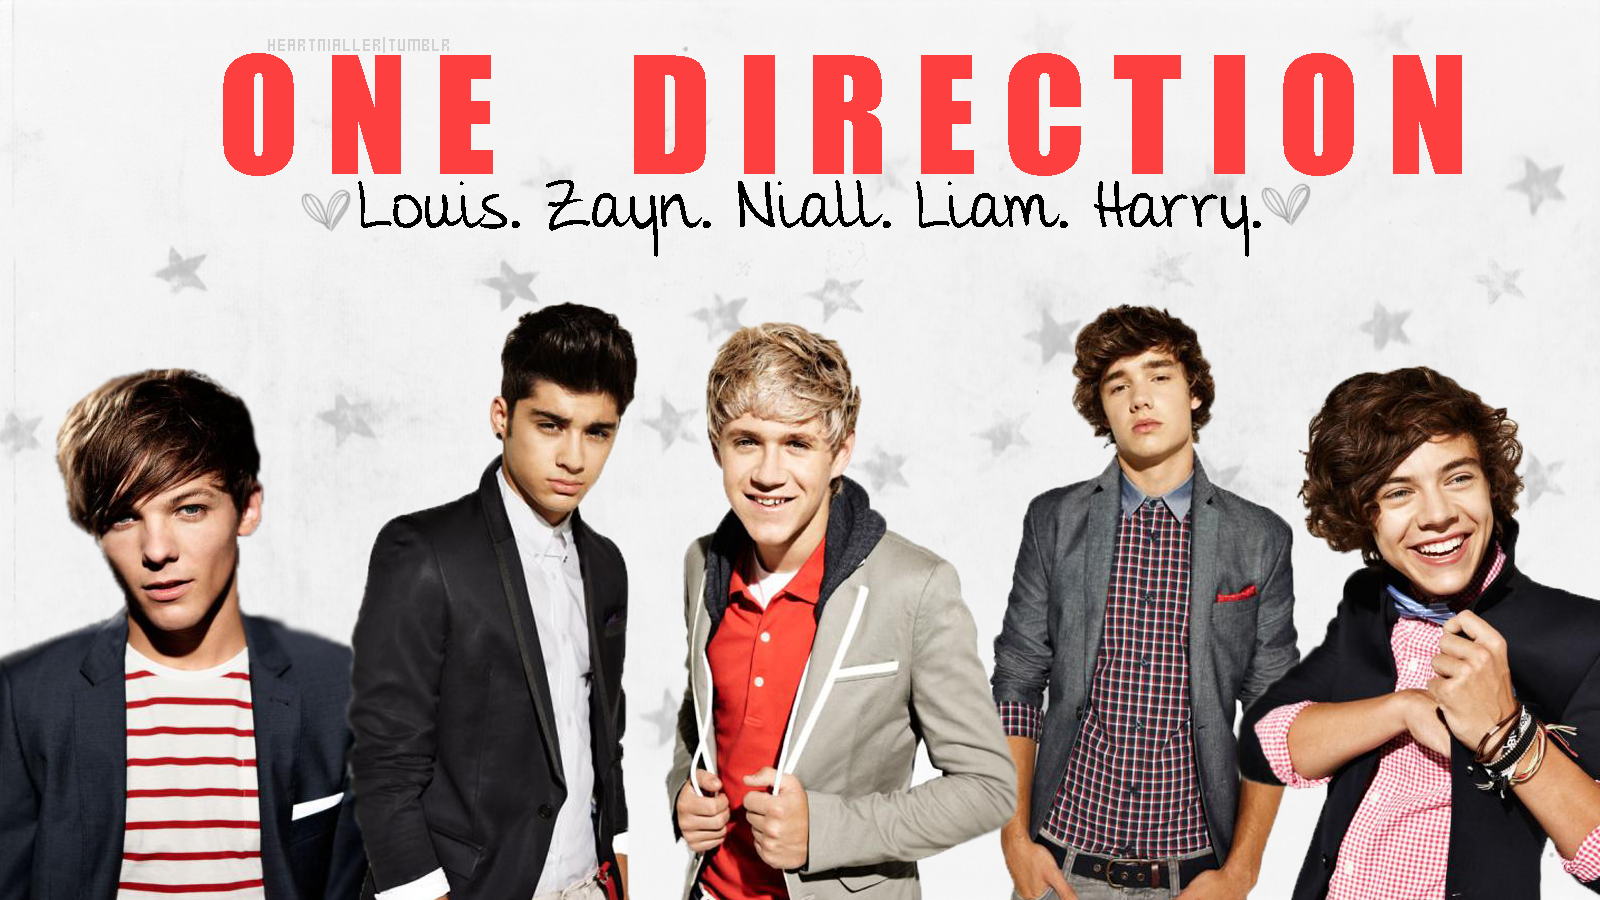 One Direction HD Wallpaper For Desktop And iPhone